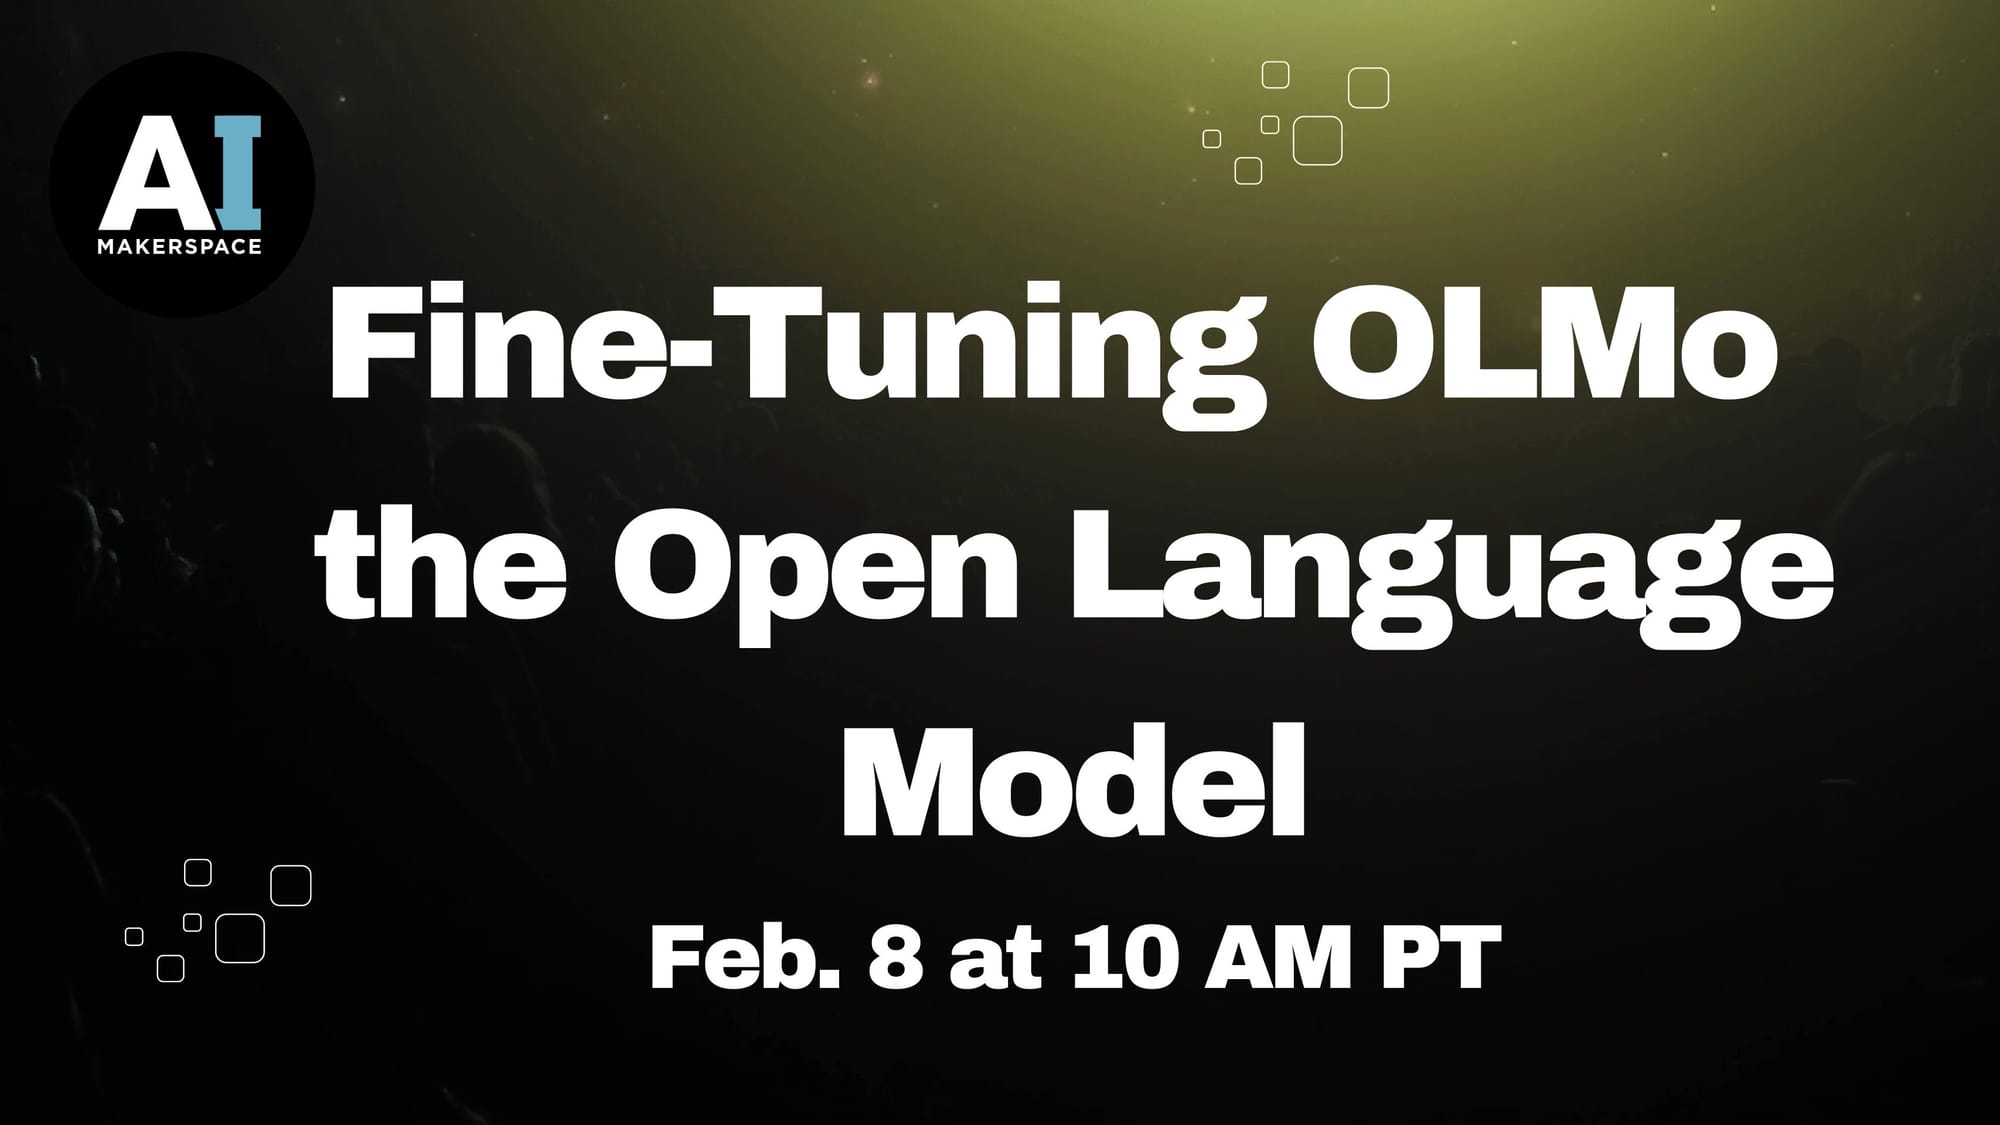 Fine-Tuning OLMo the Open Language Model